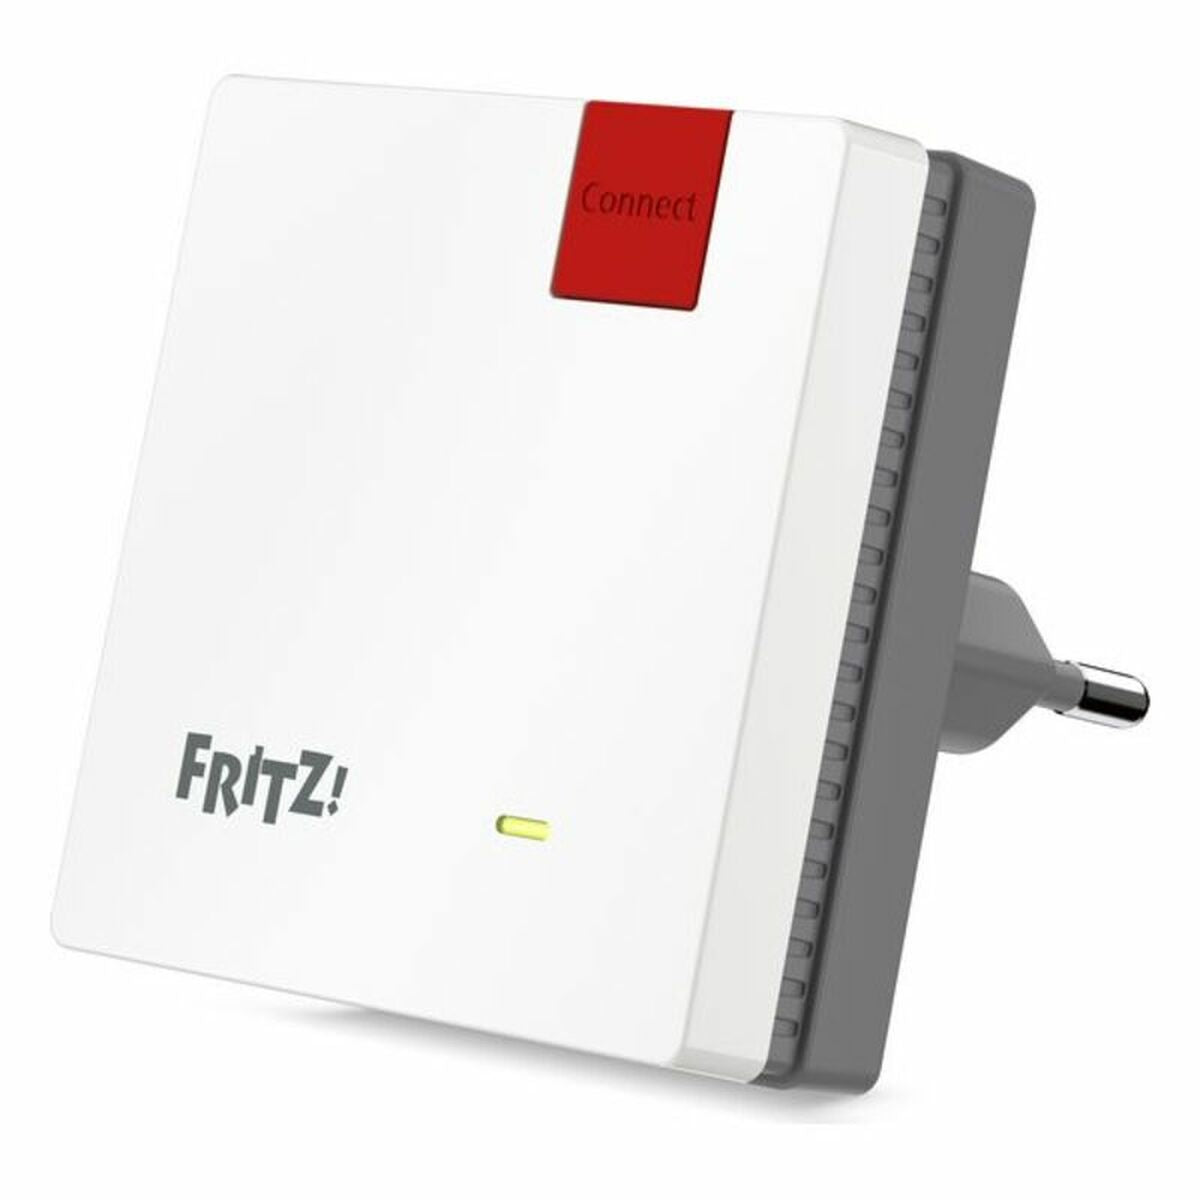 Access Point Repeater Fritz! 20002885 2.4 GHz 600 Mbps White, Fritz!, Computing, Network devices, access-point-repeater-fritz-20002885-2-4-ghz-600-mbps-white-1, Brand_Fritz!, category-reference-2609, category-reference-2803, category-reference-2820, category-reference-t-19685, category-reference-t-19914, Condition_NEW, networks/wiring, Price_50 - 100, Teleworking, RiotNook